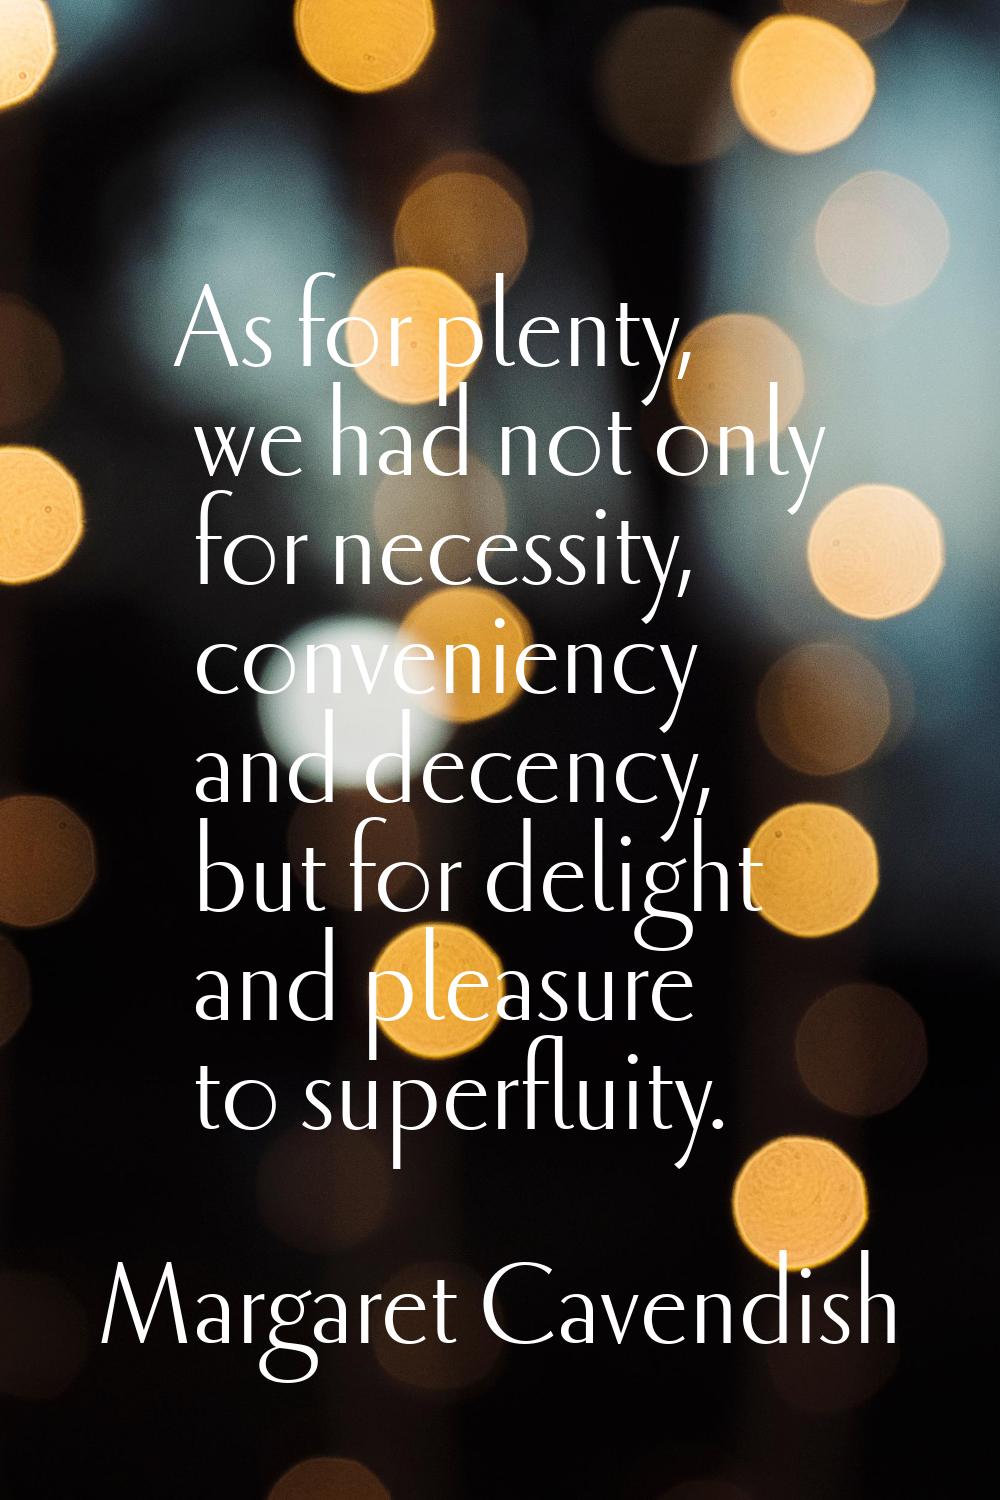 As for plenty, we had not only for necessity, conveniency and decency, but for delight and pleasure